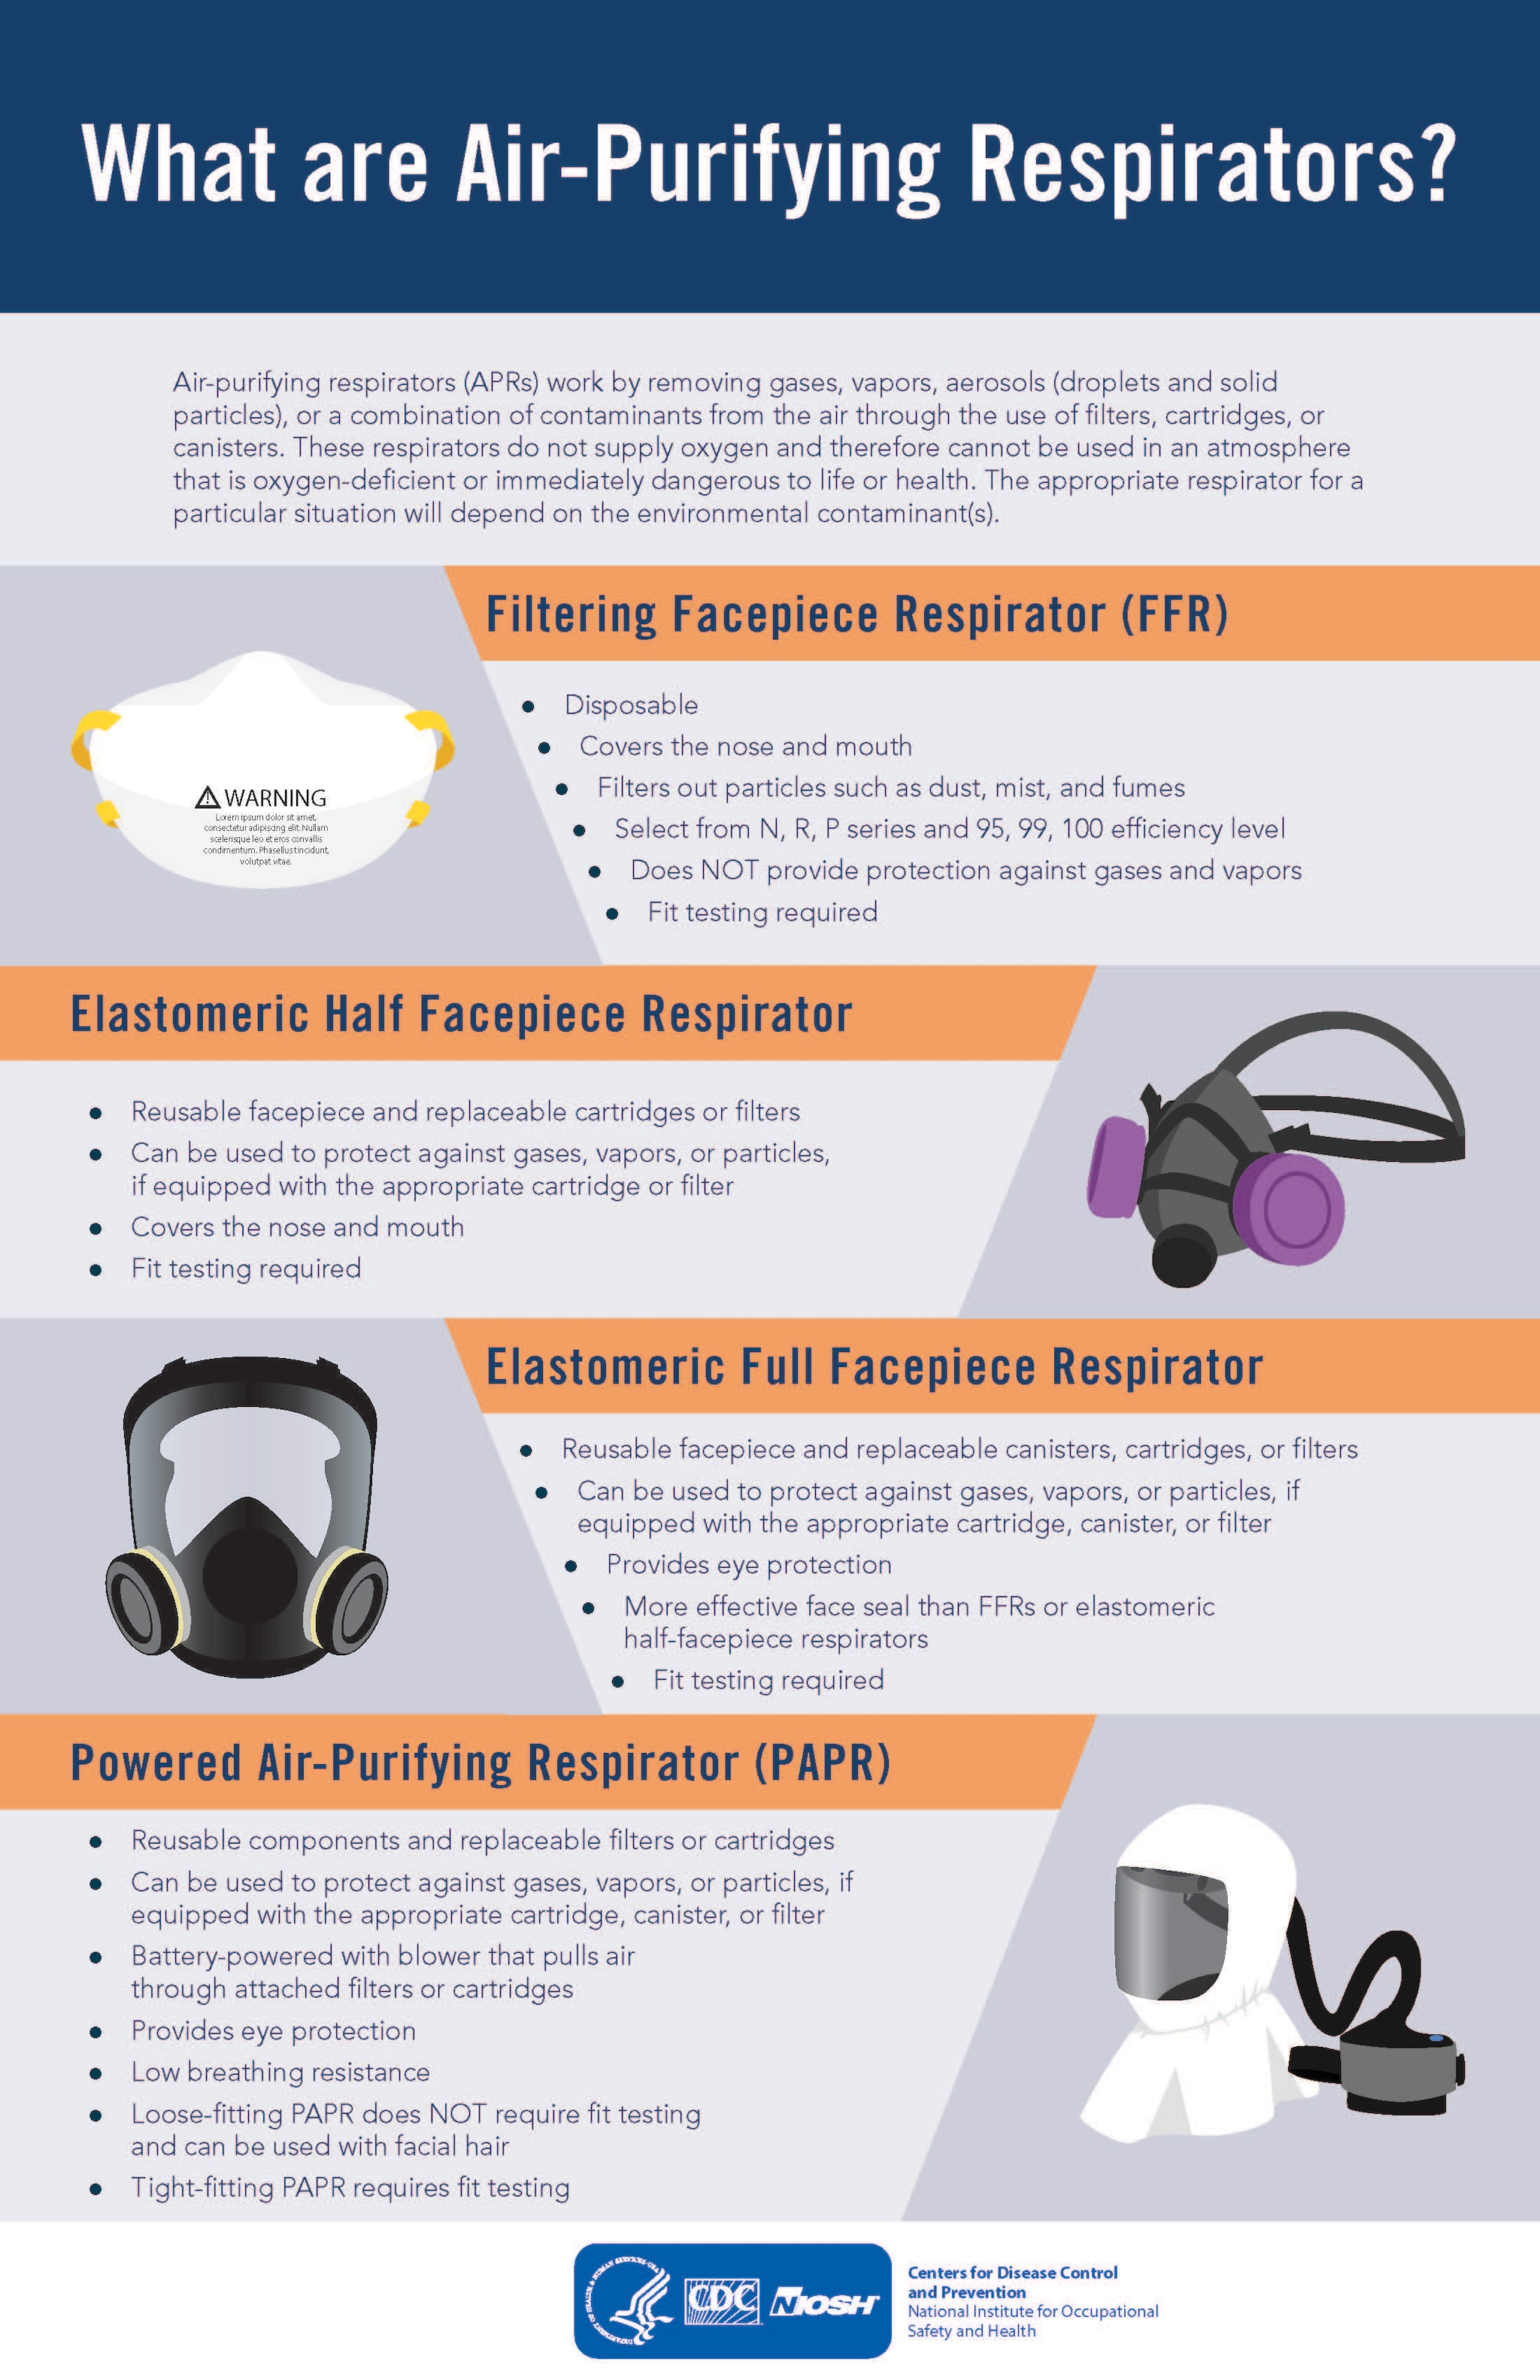 What are Air-Purifying Respirators?